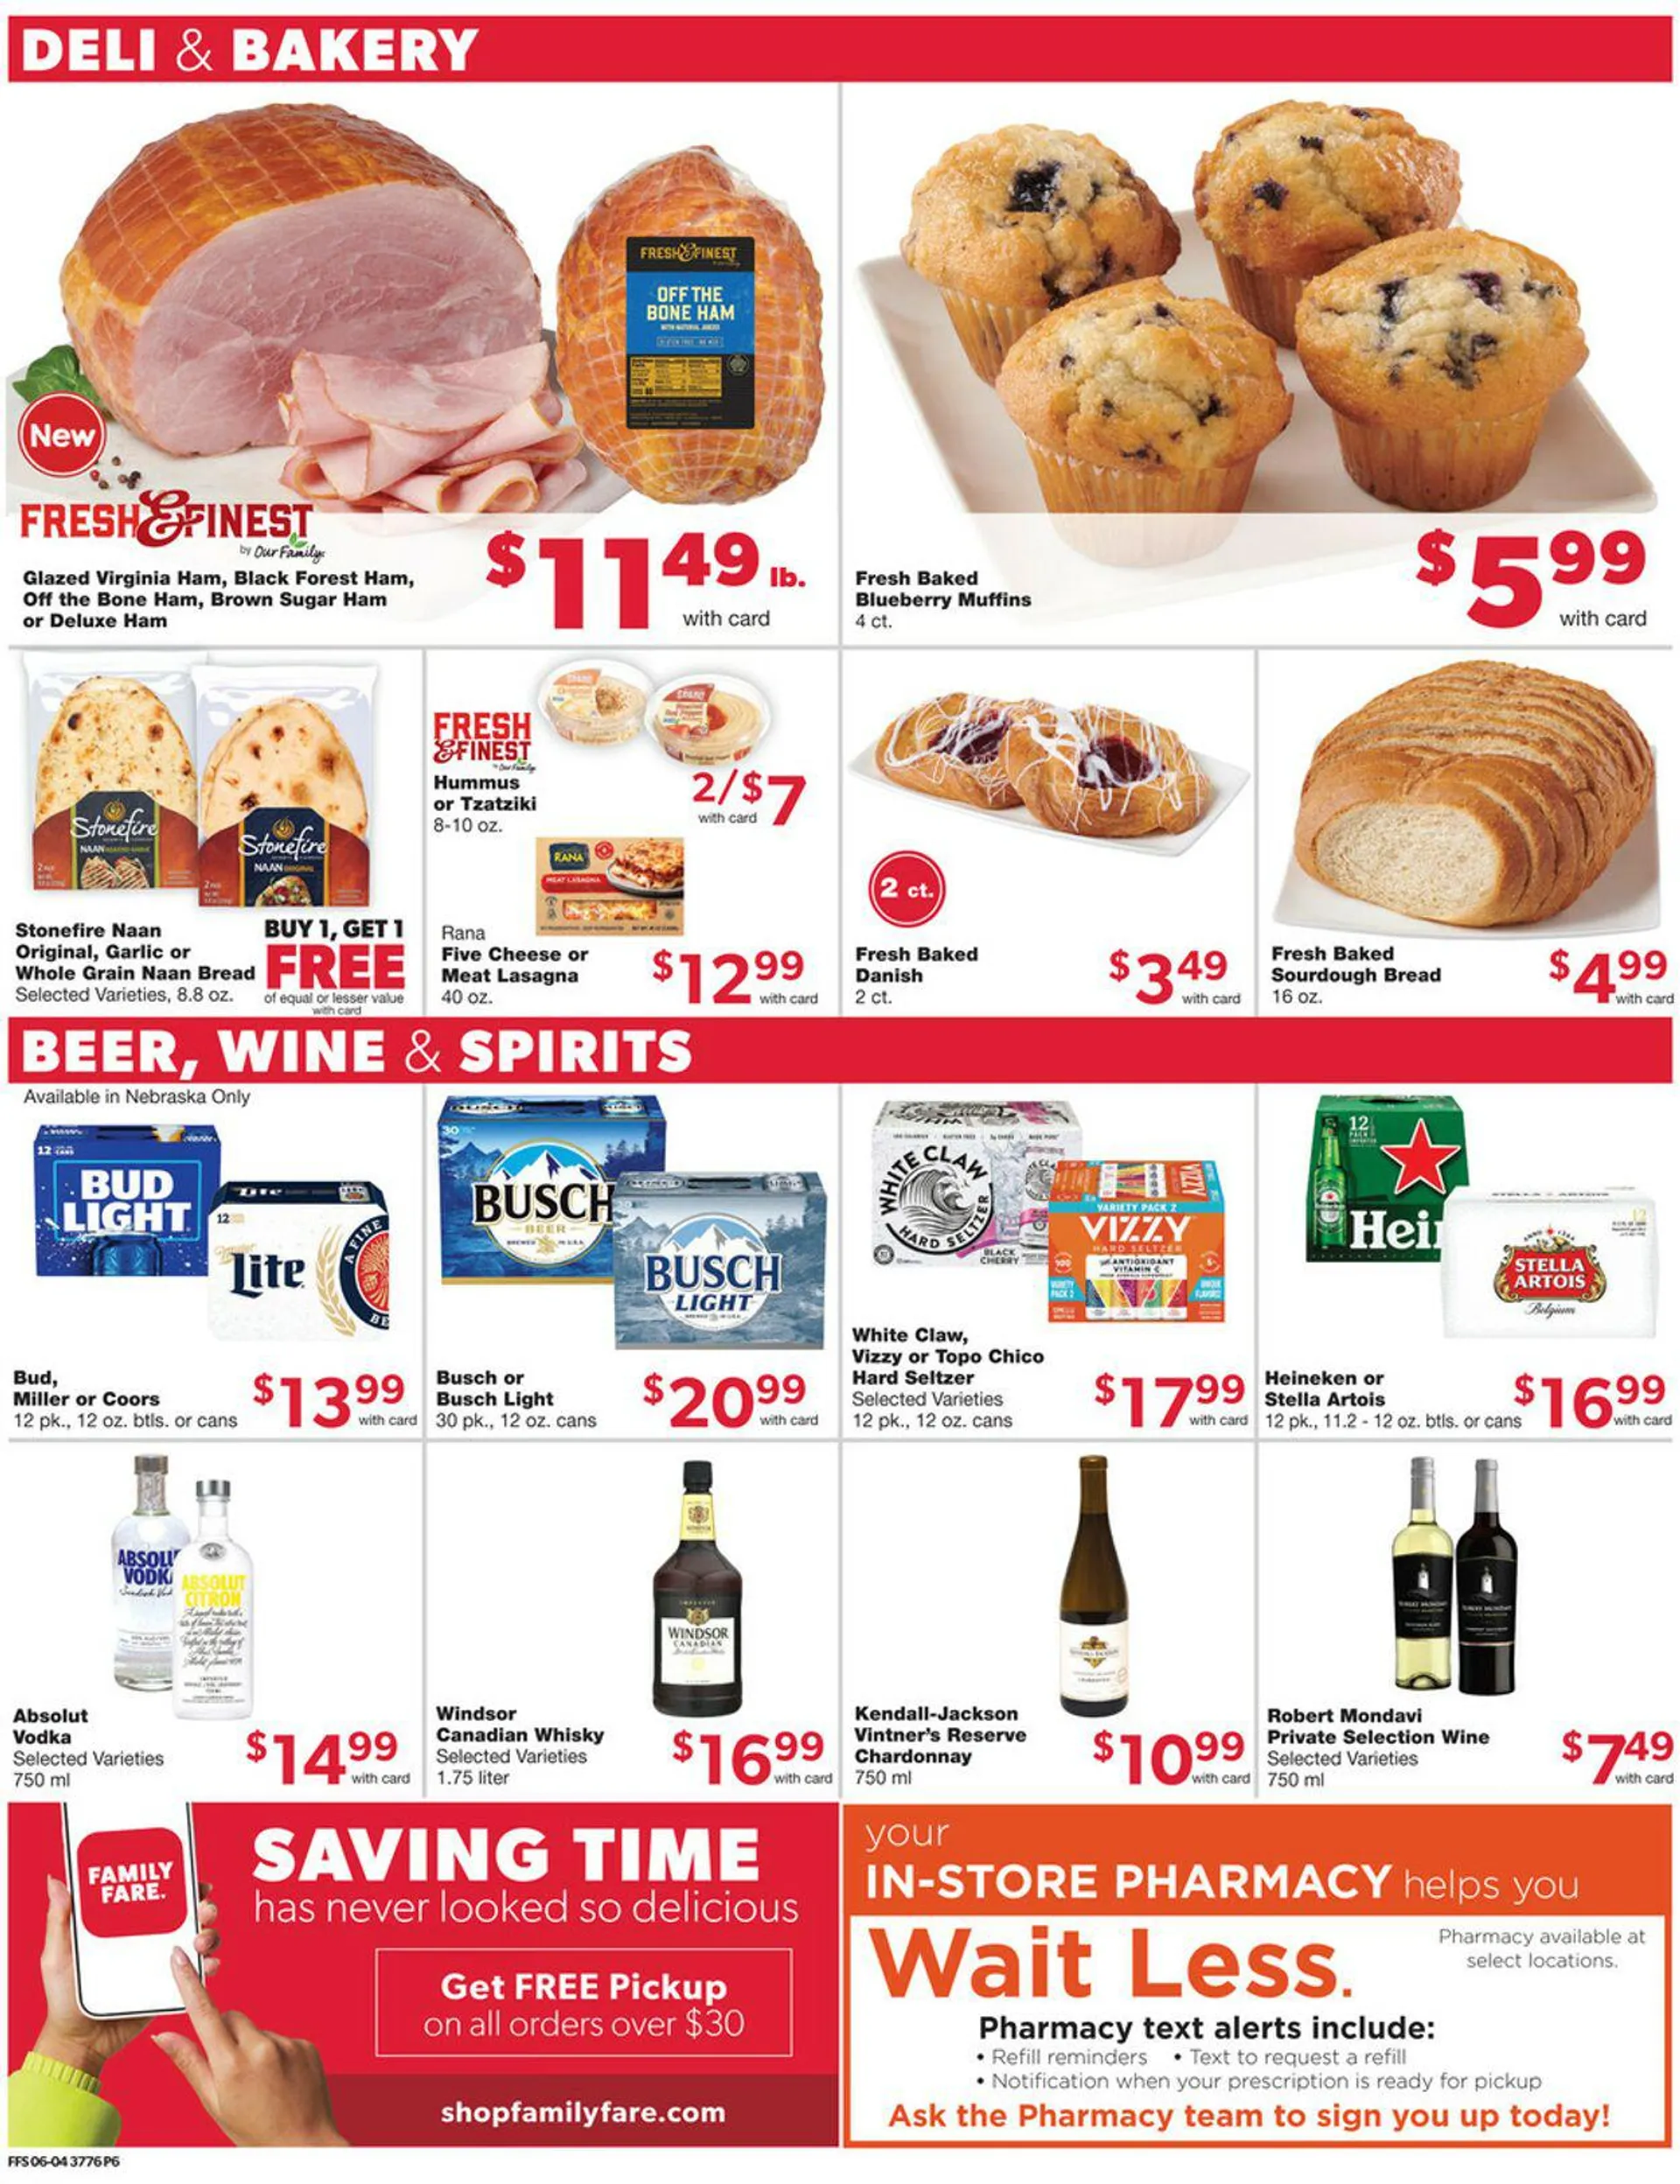 Family Fare Current weekly ad - 10